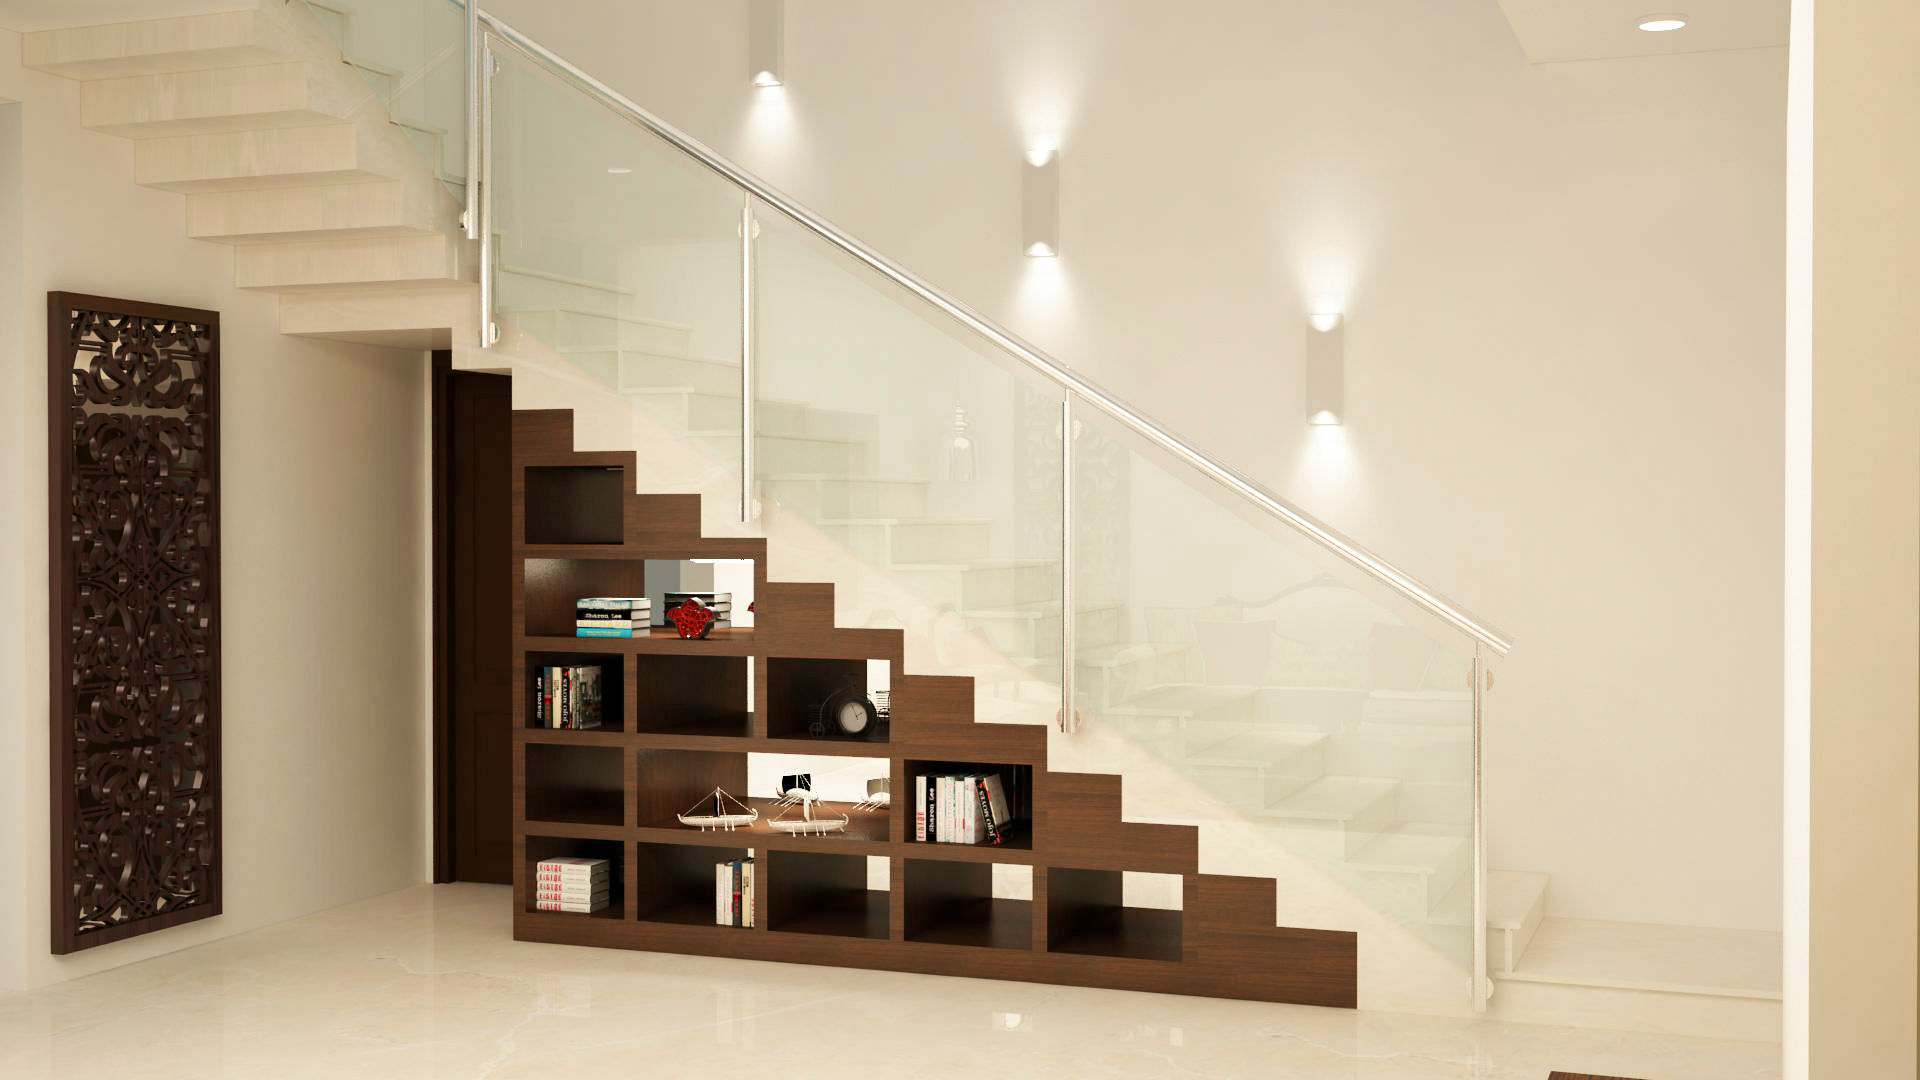 Stairs open display and storage homify 樓梯